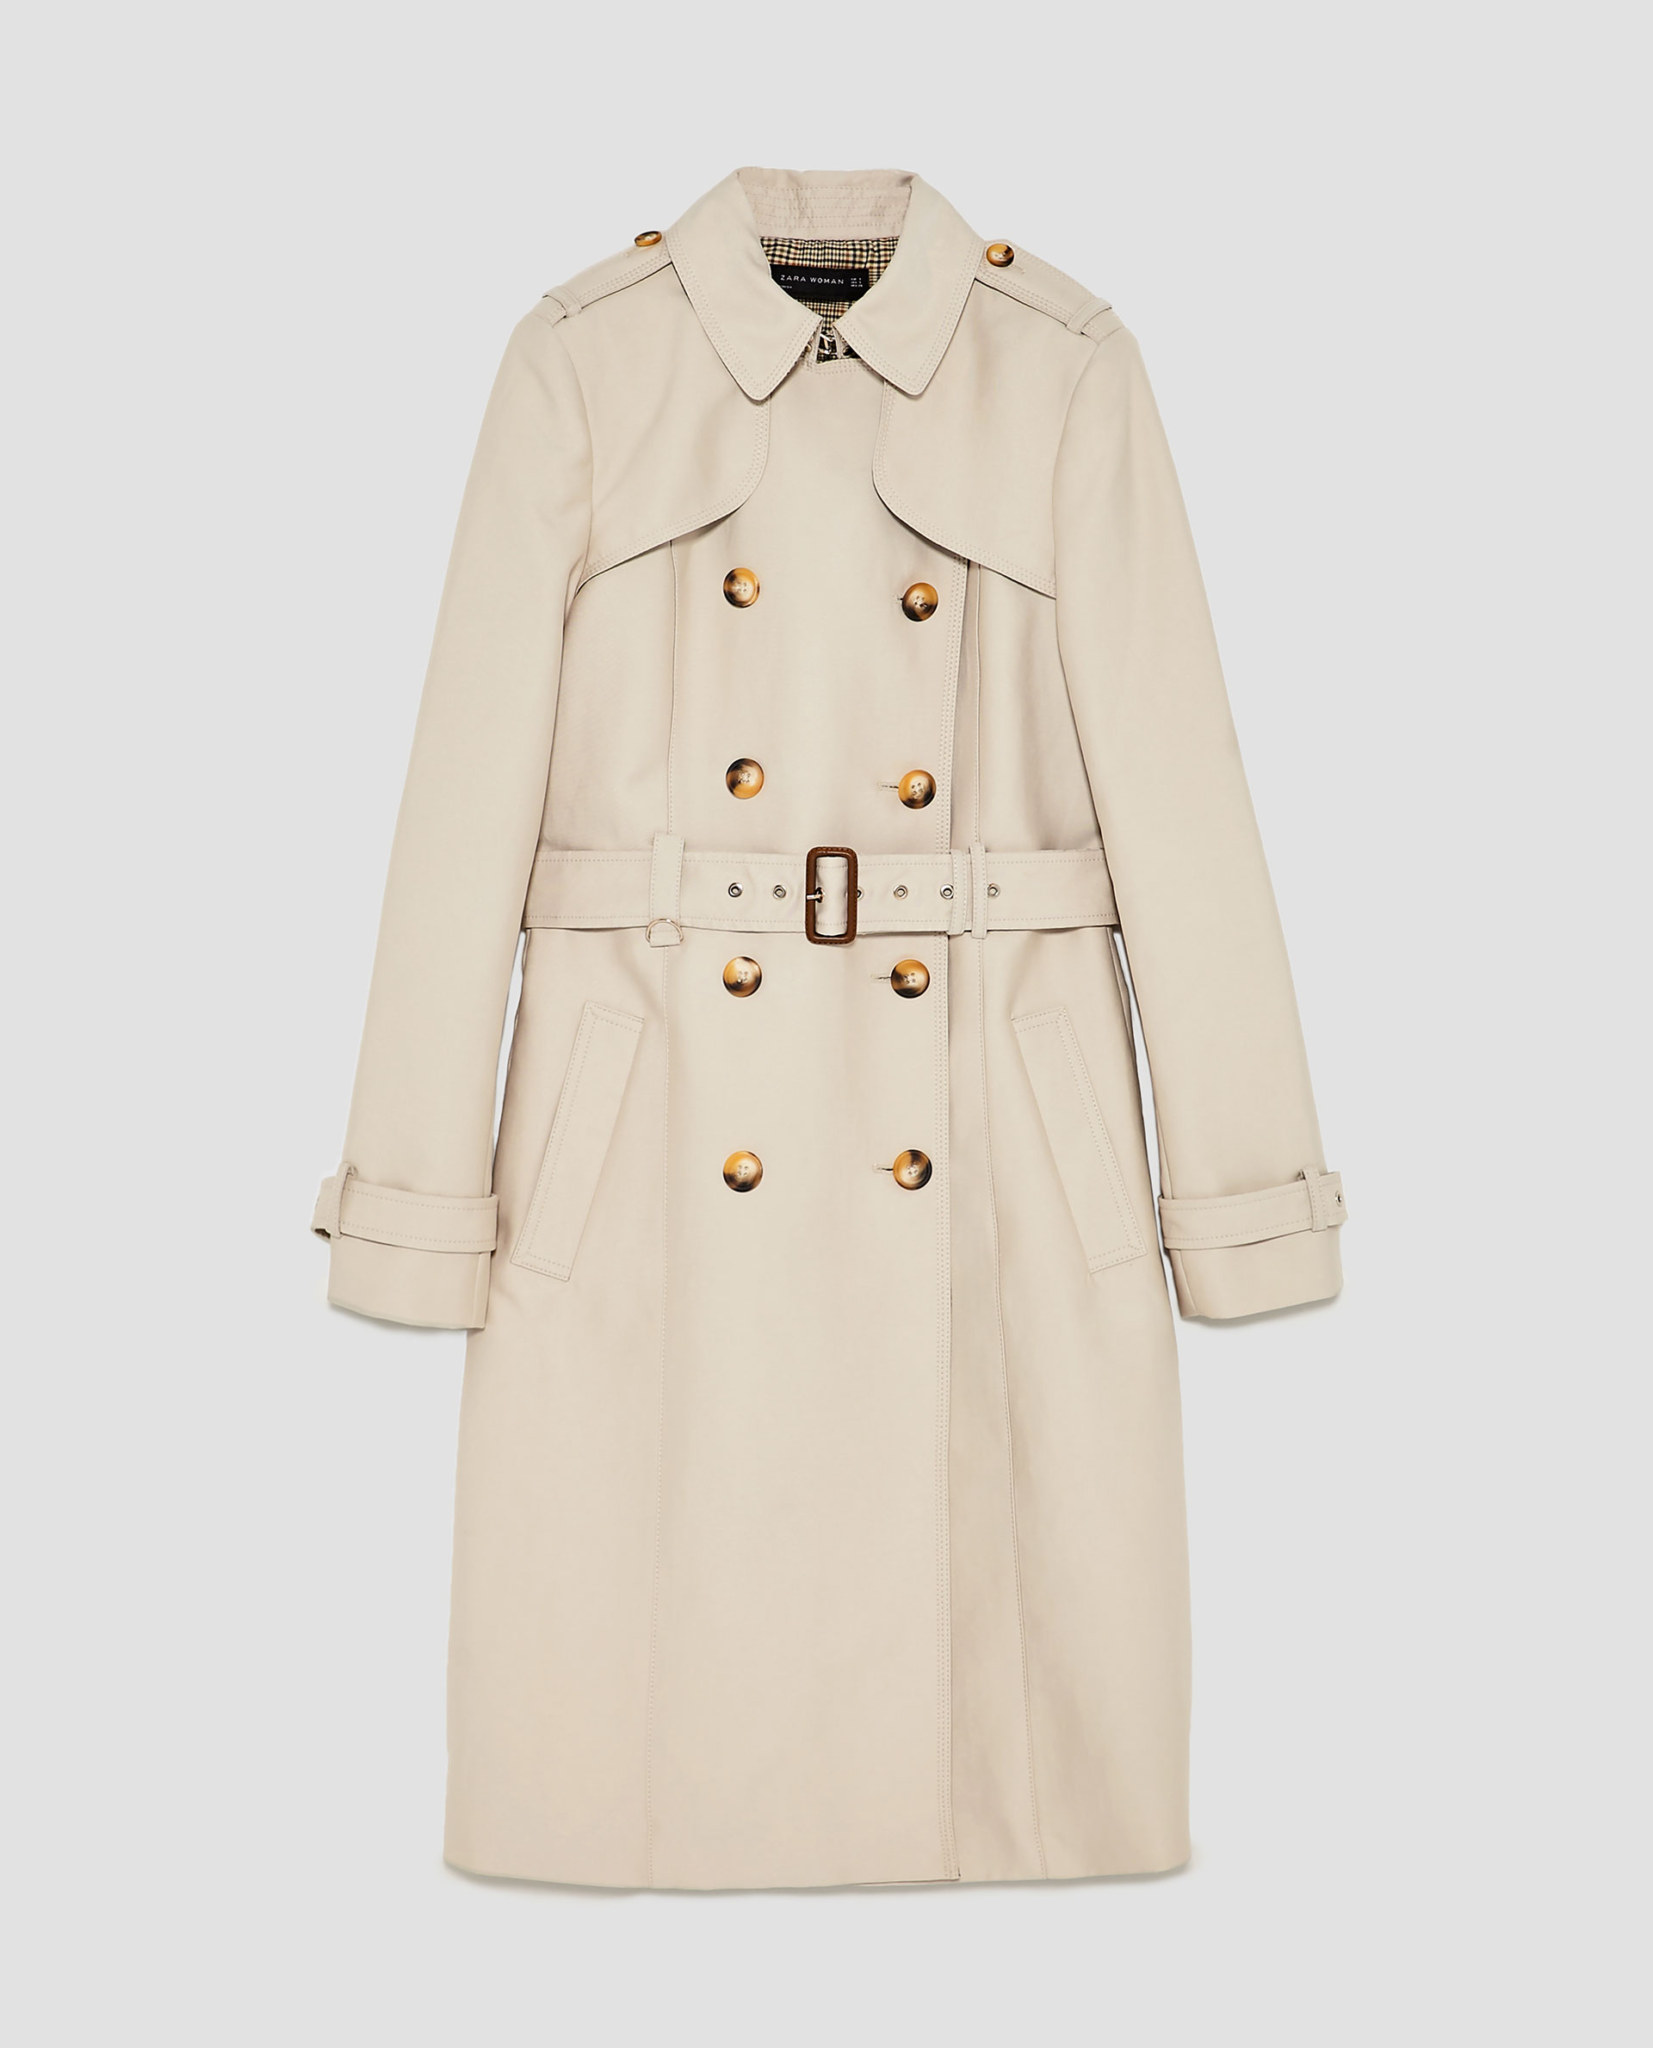 Classic trench coat – Must have this season – AnnabellasChoice